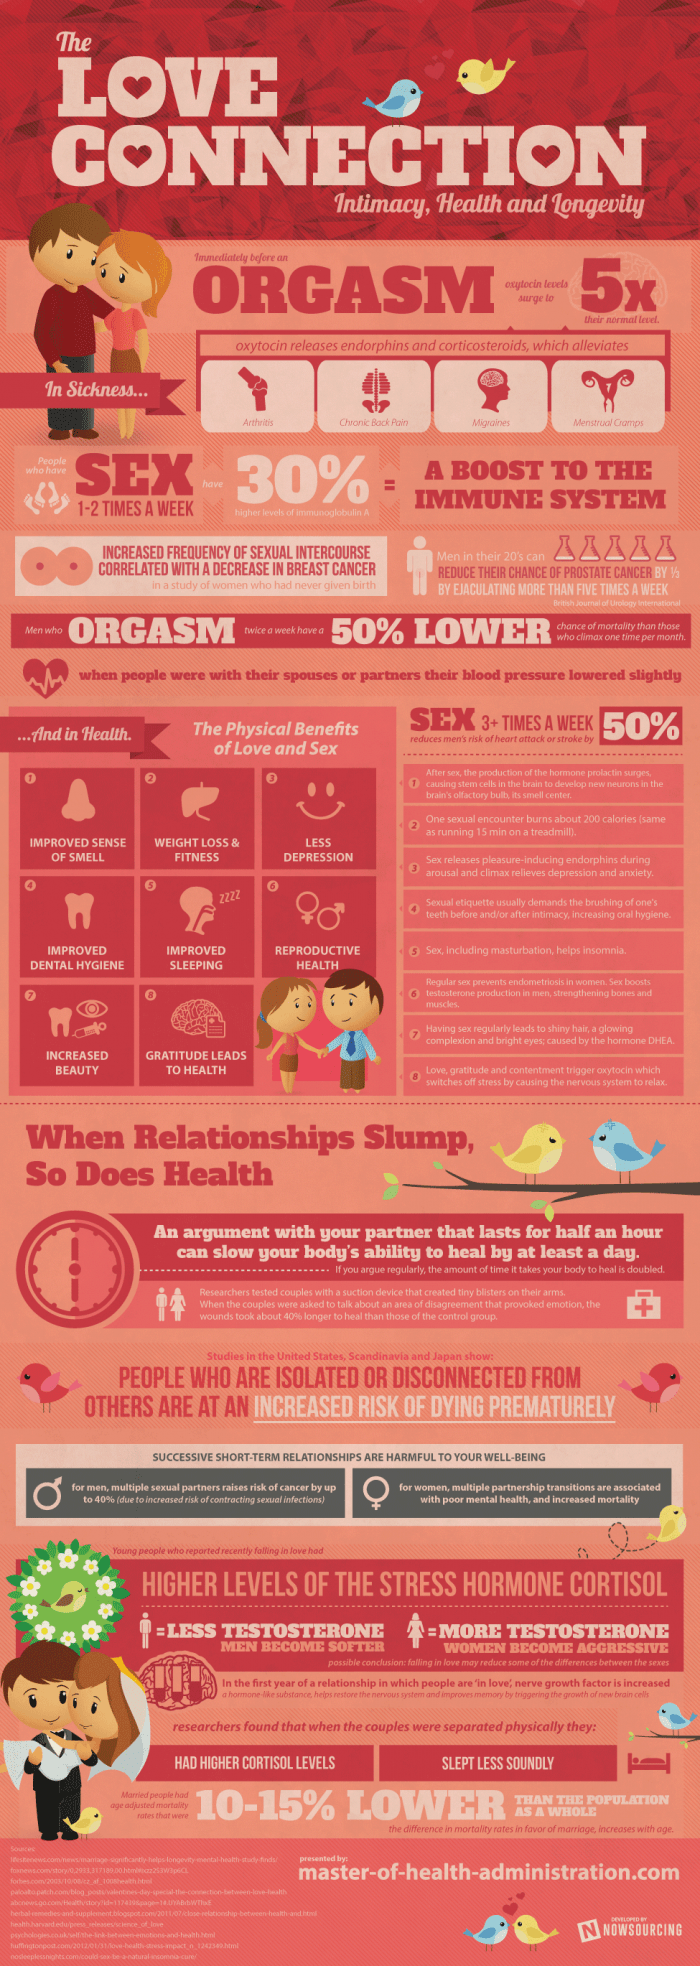 infographic describes Intimacy and sex impact on health